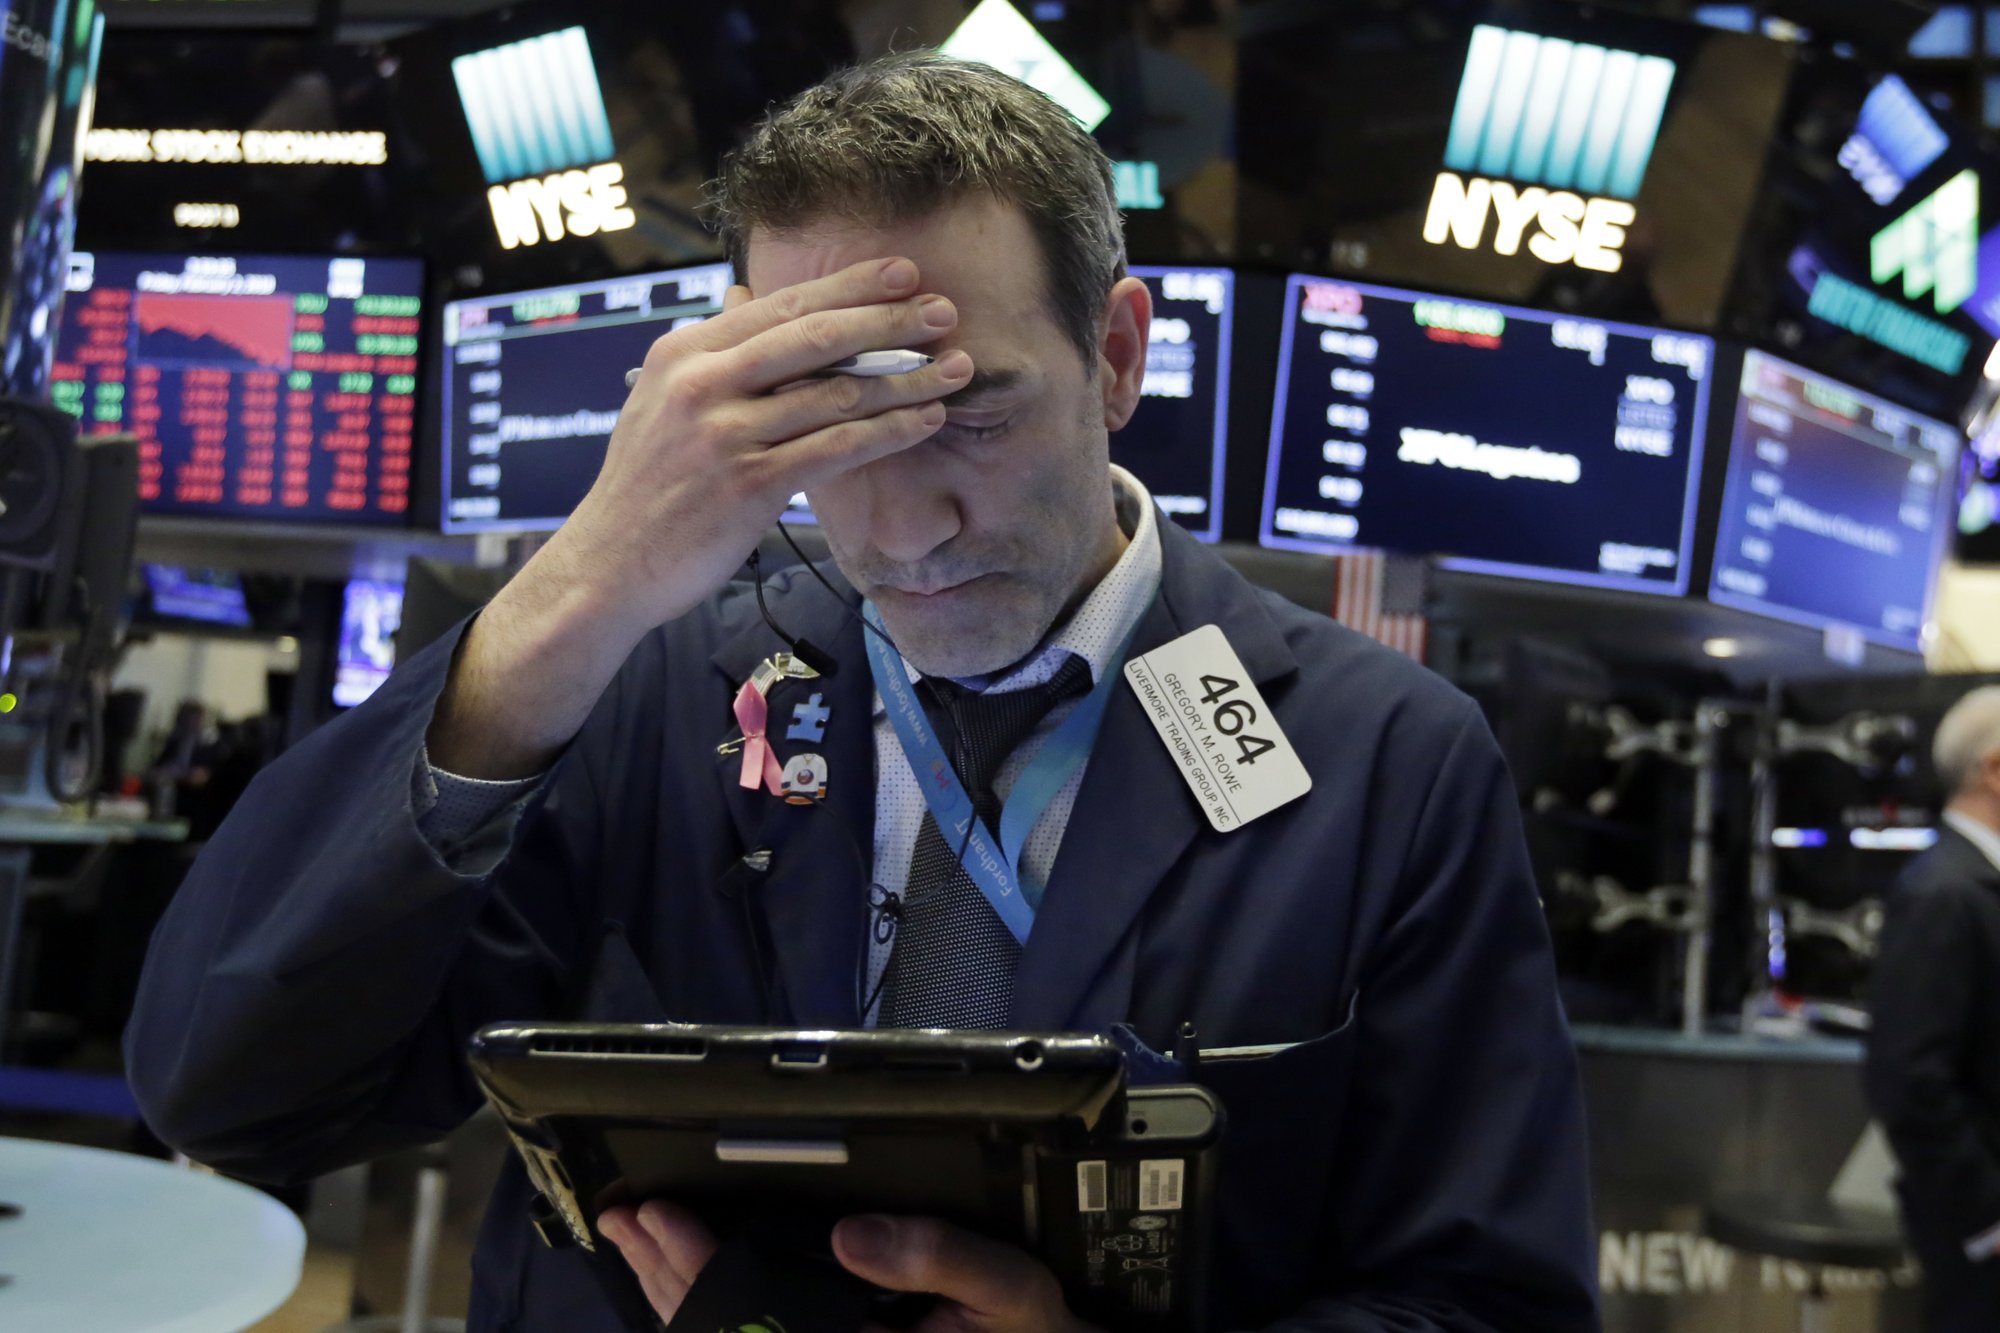 US stocks are down with a record high in Coronavirus cases